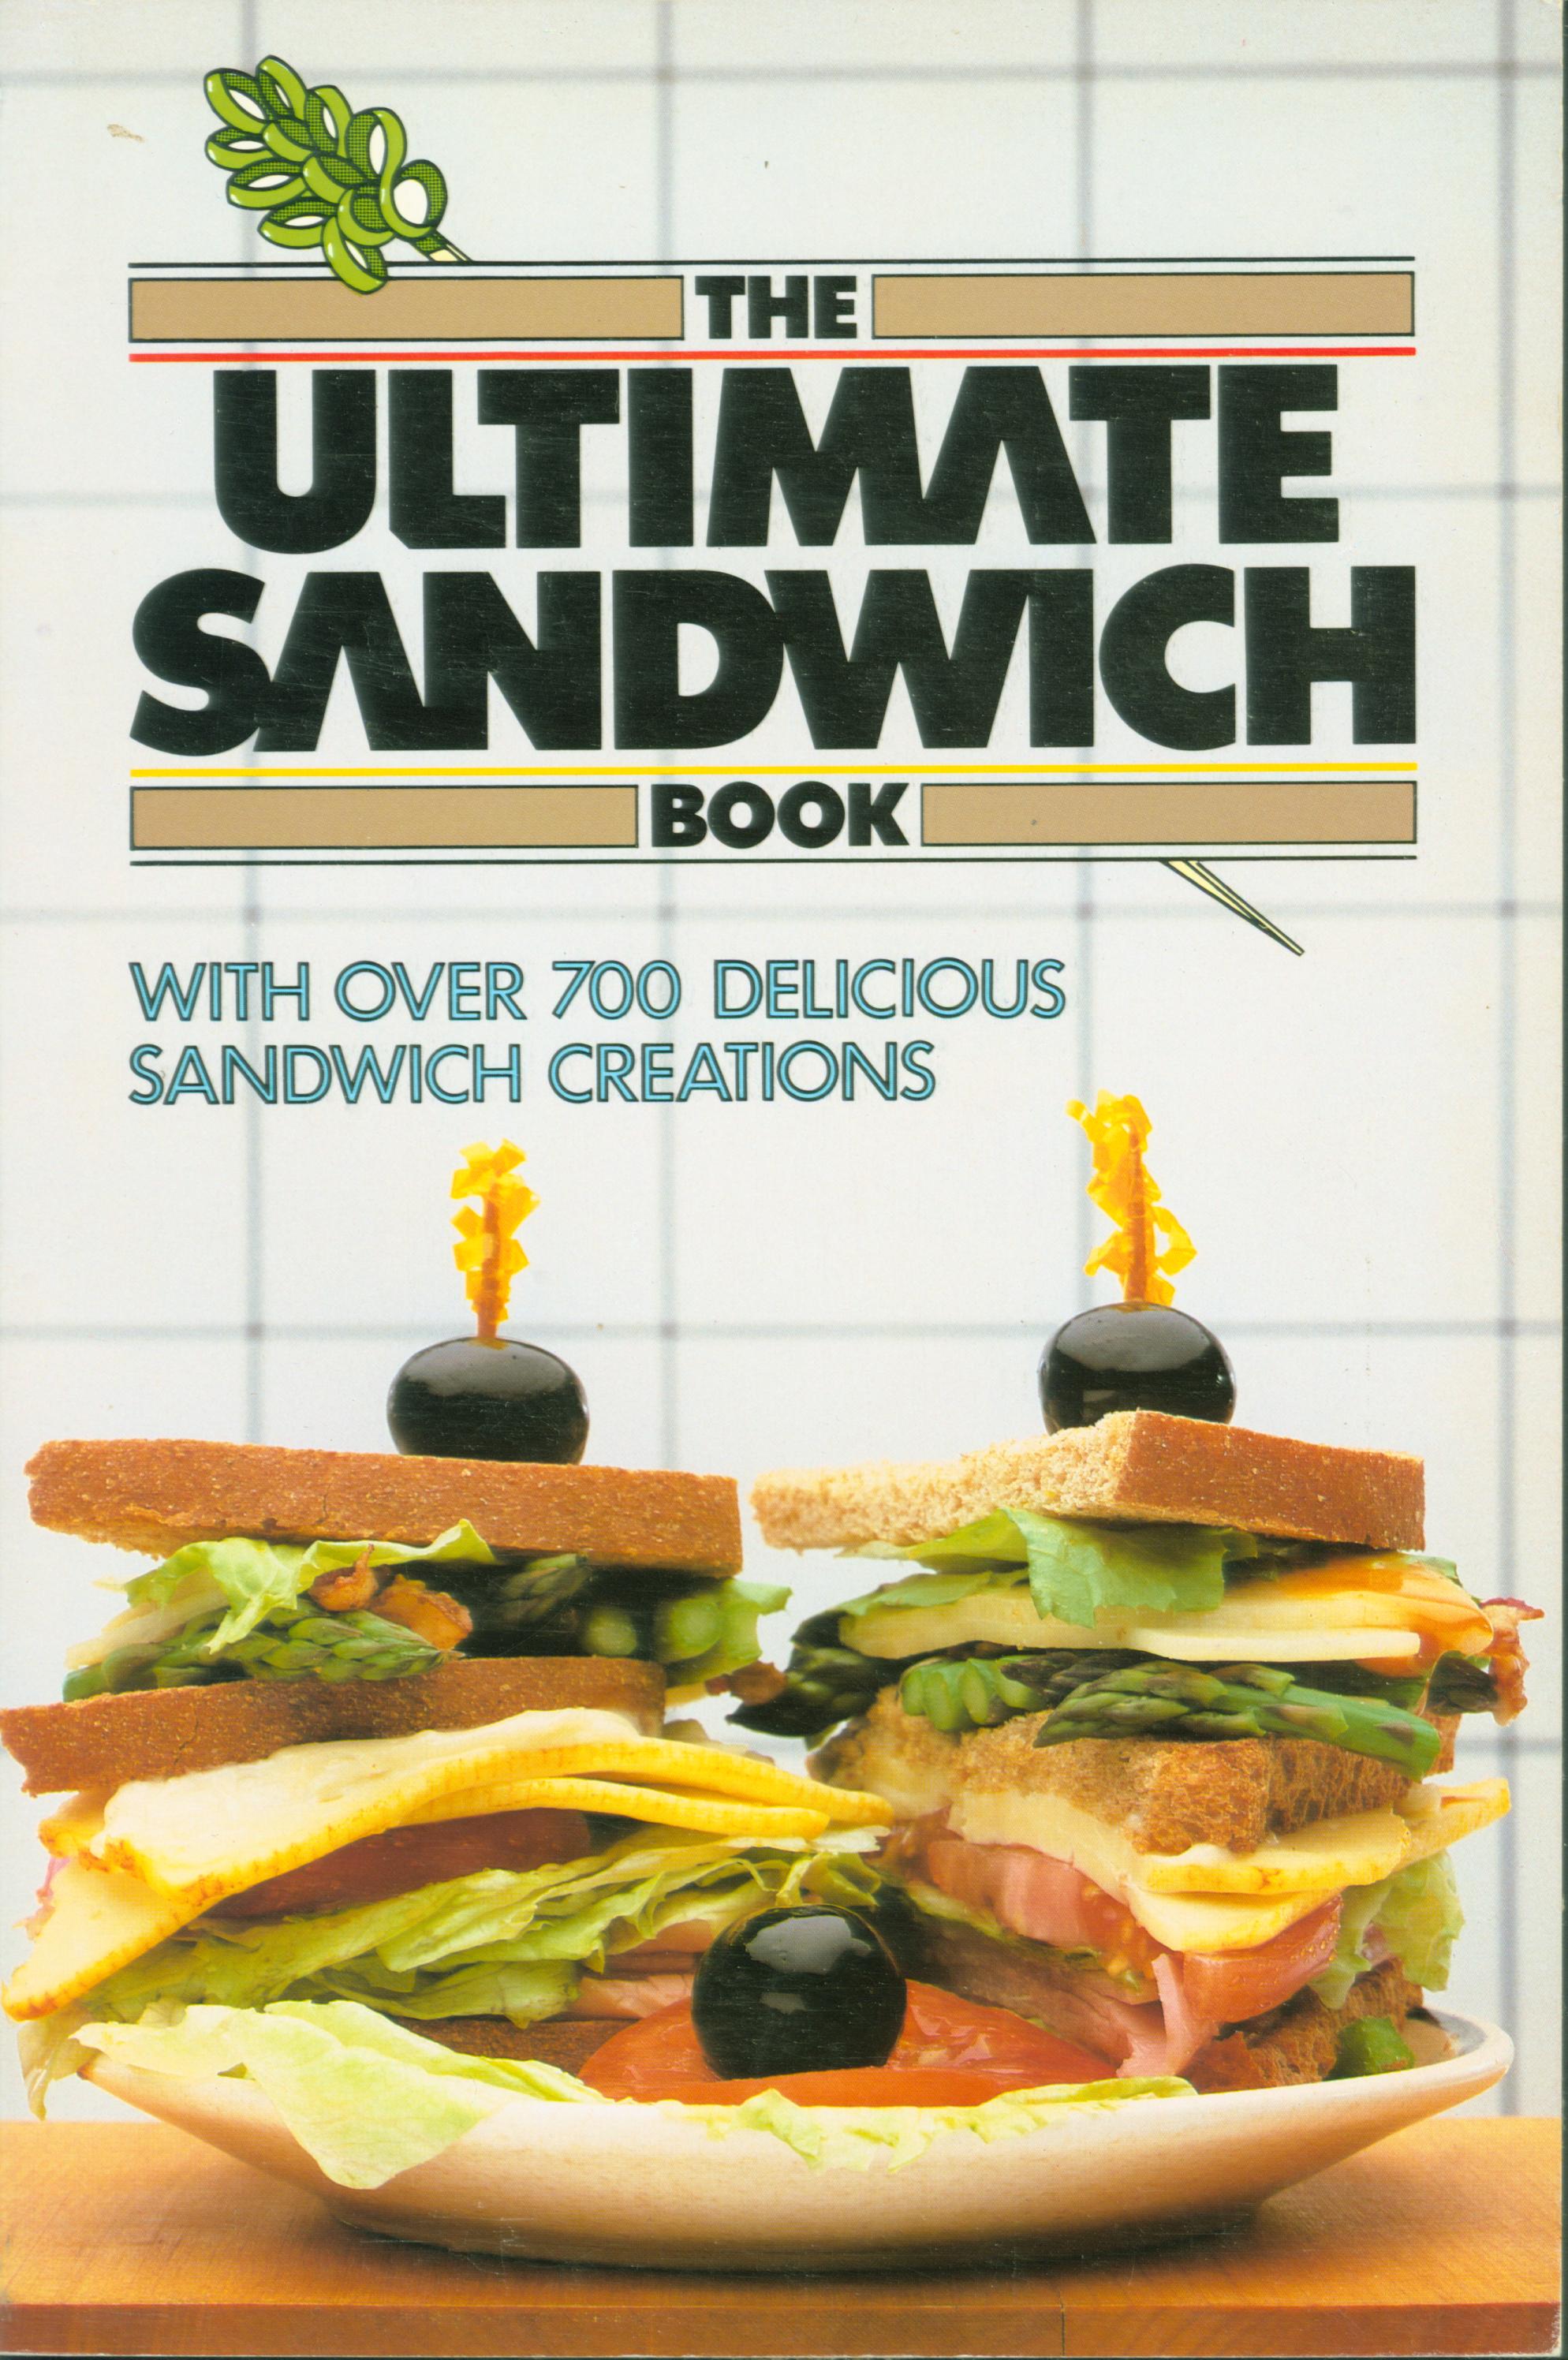 THE ULTIMATE SANDWICH BOOK with over 700 delicious sandwich creations. 